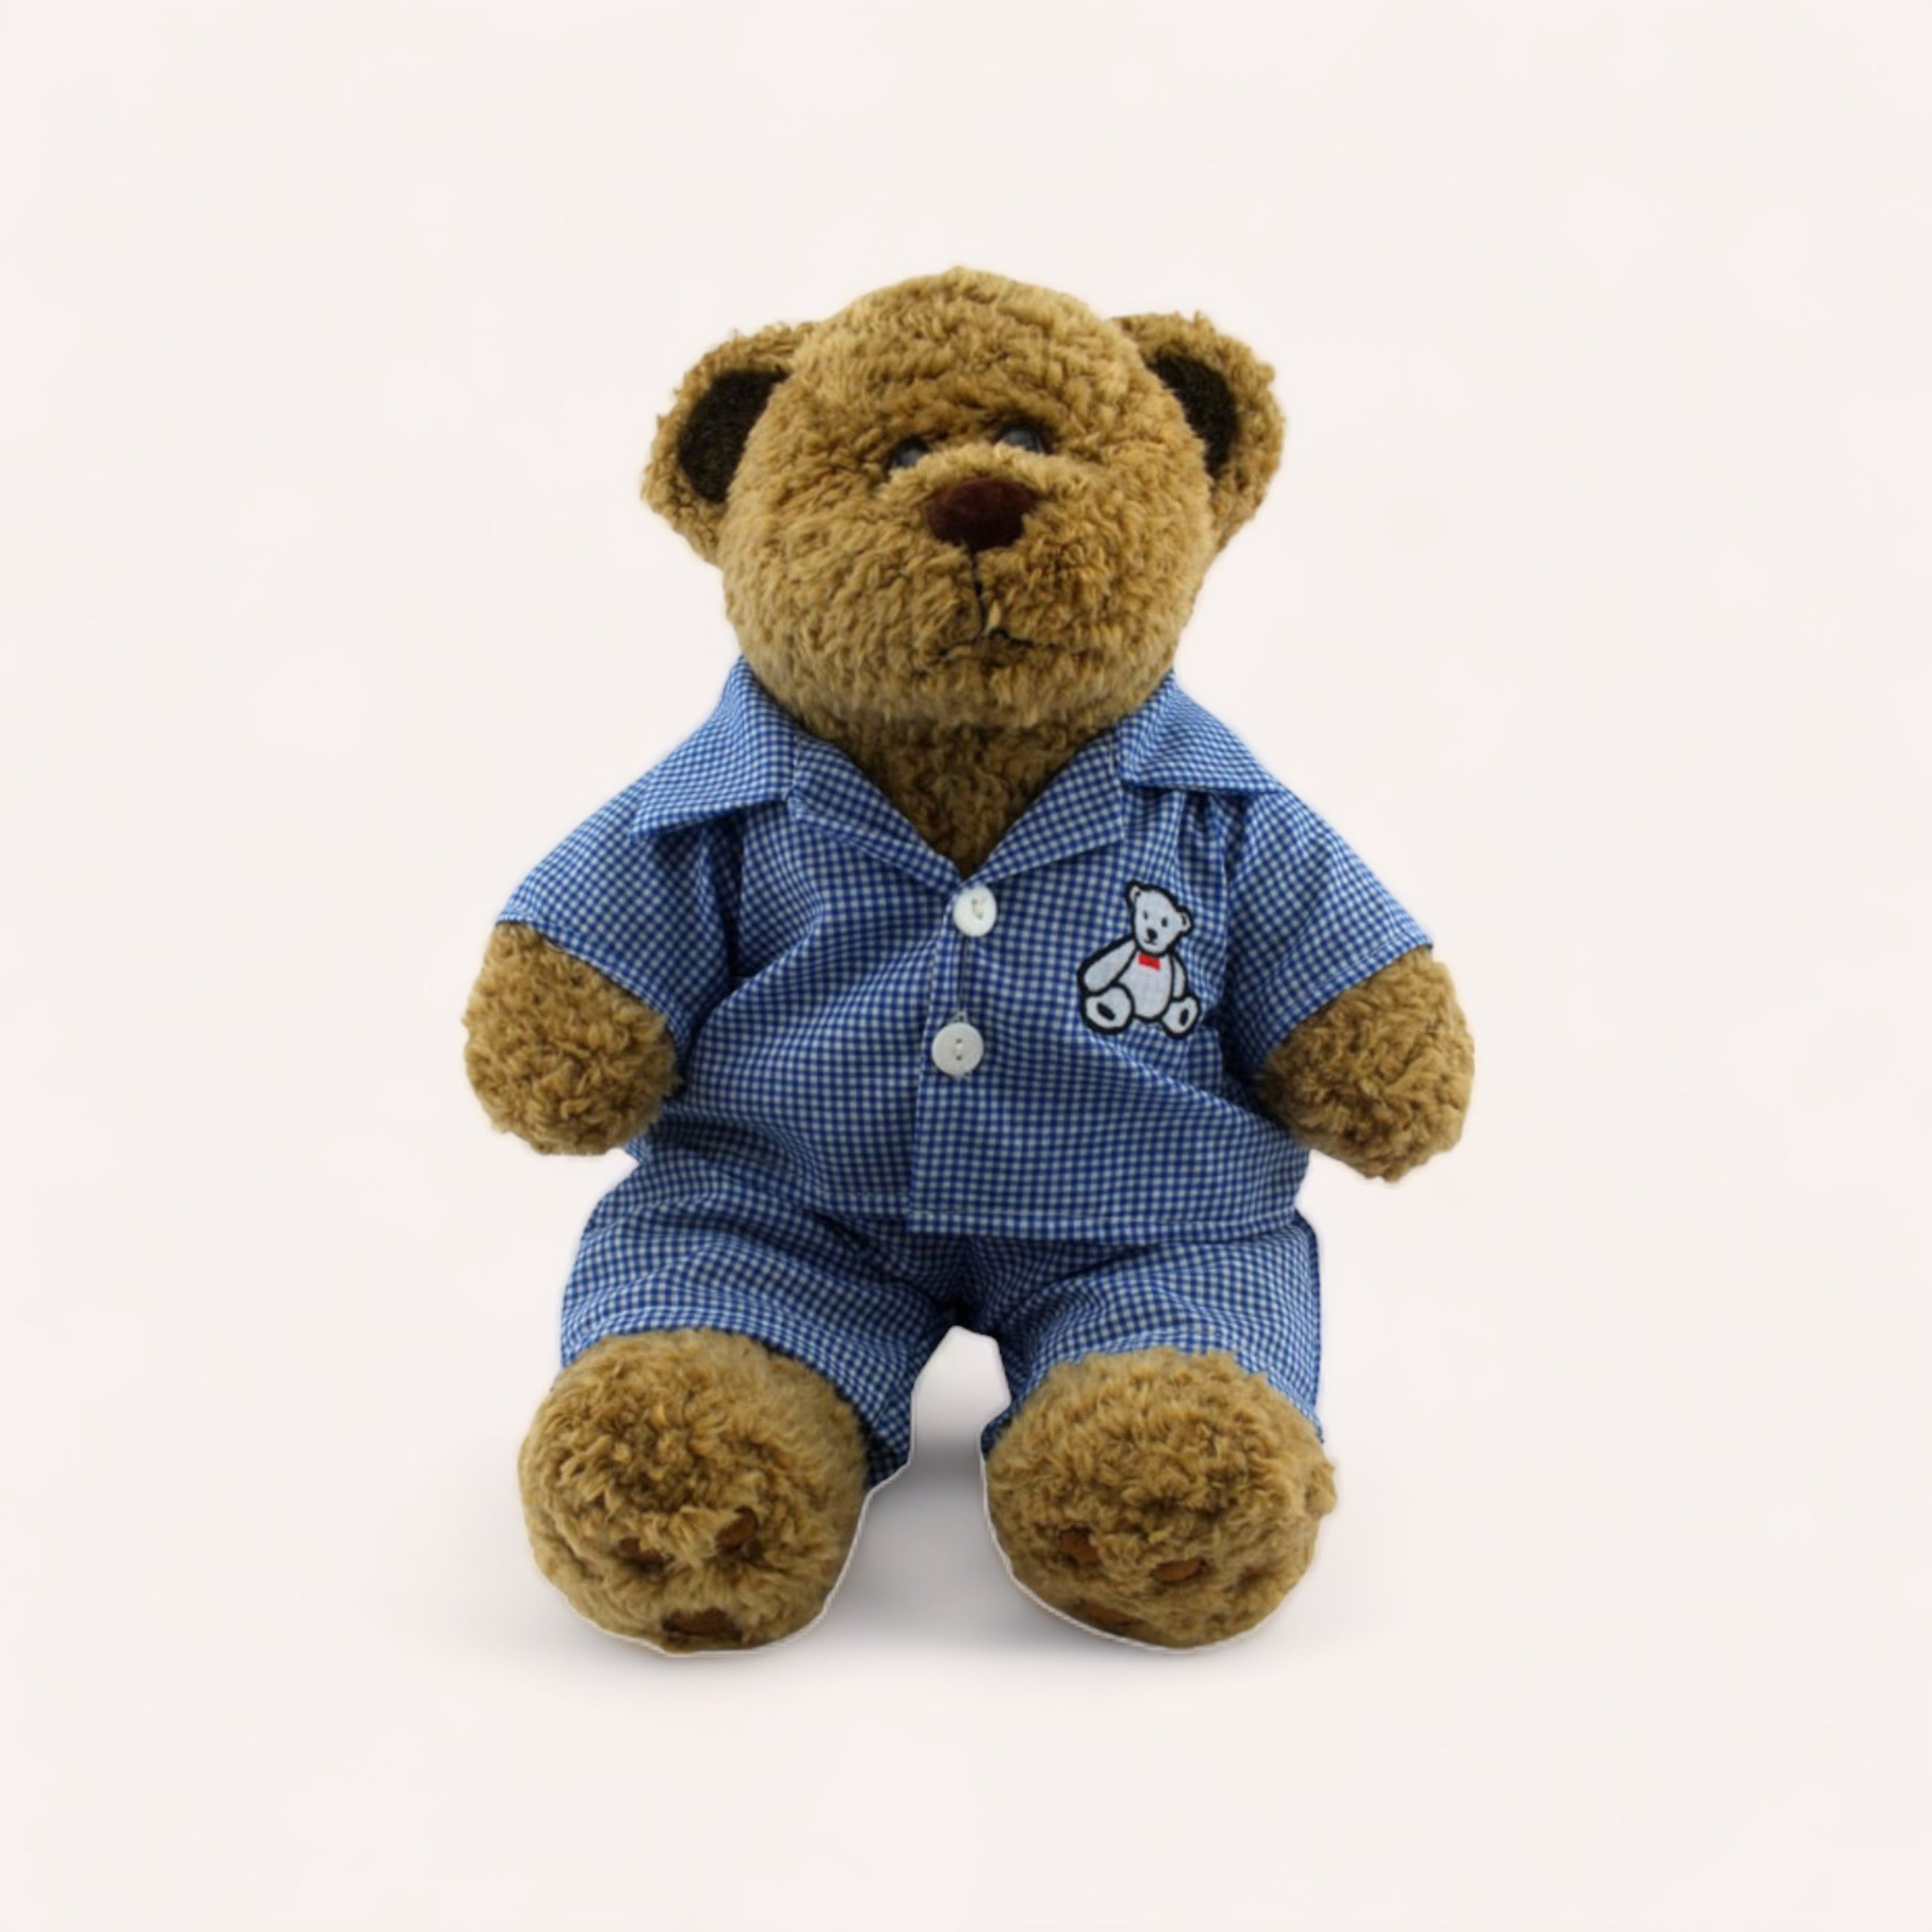 A plush teddy bear dressed in The Teddy Factory's Bear PJ's Outfit with a cute patch on it, sitting isolated on a white background.